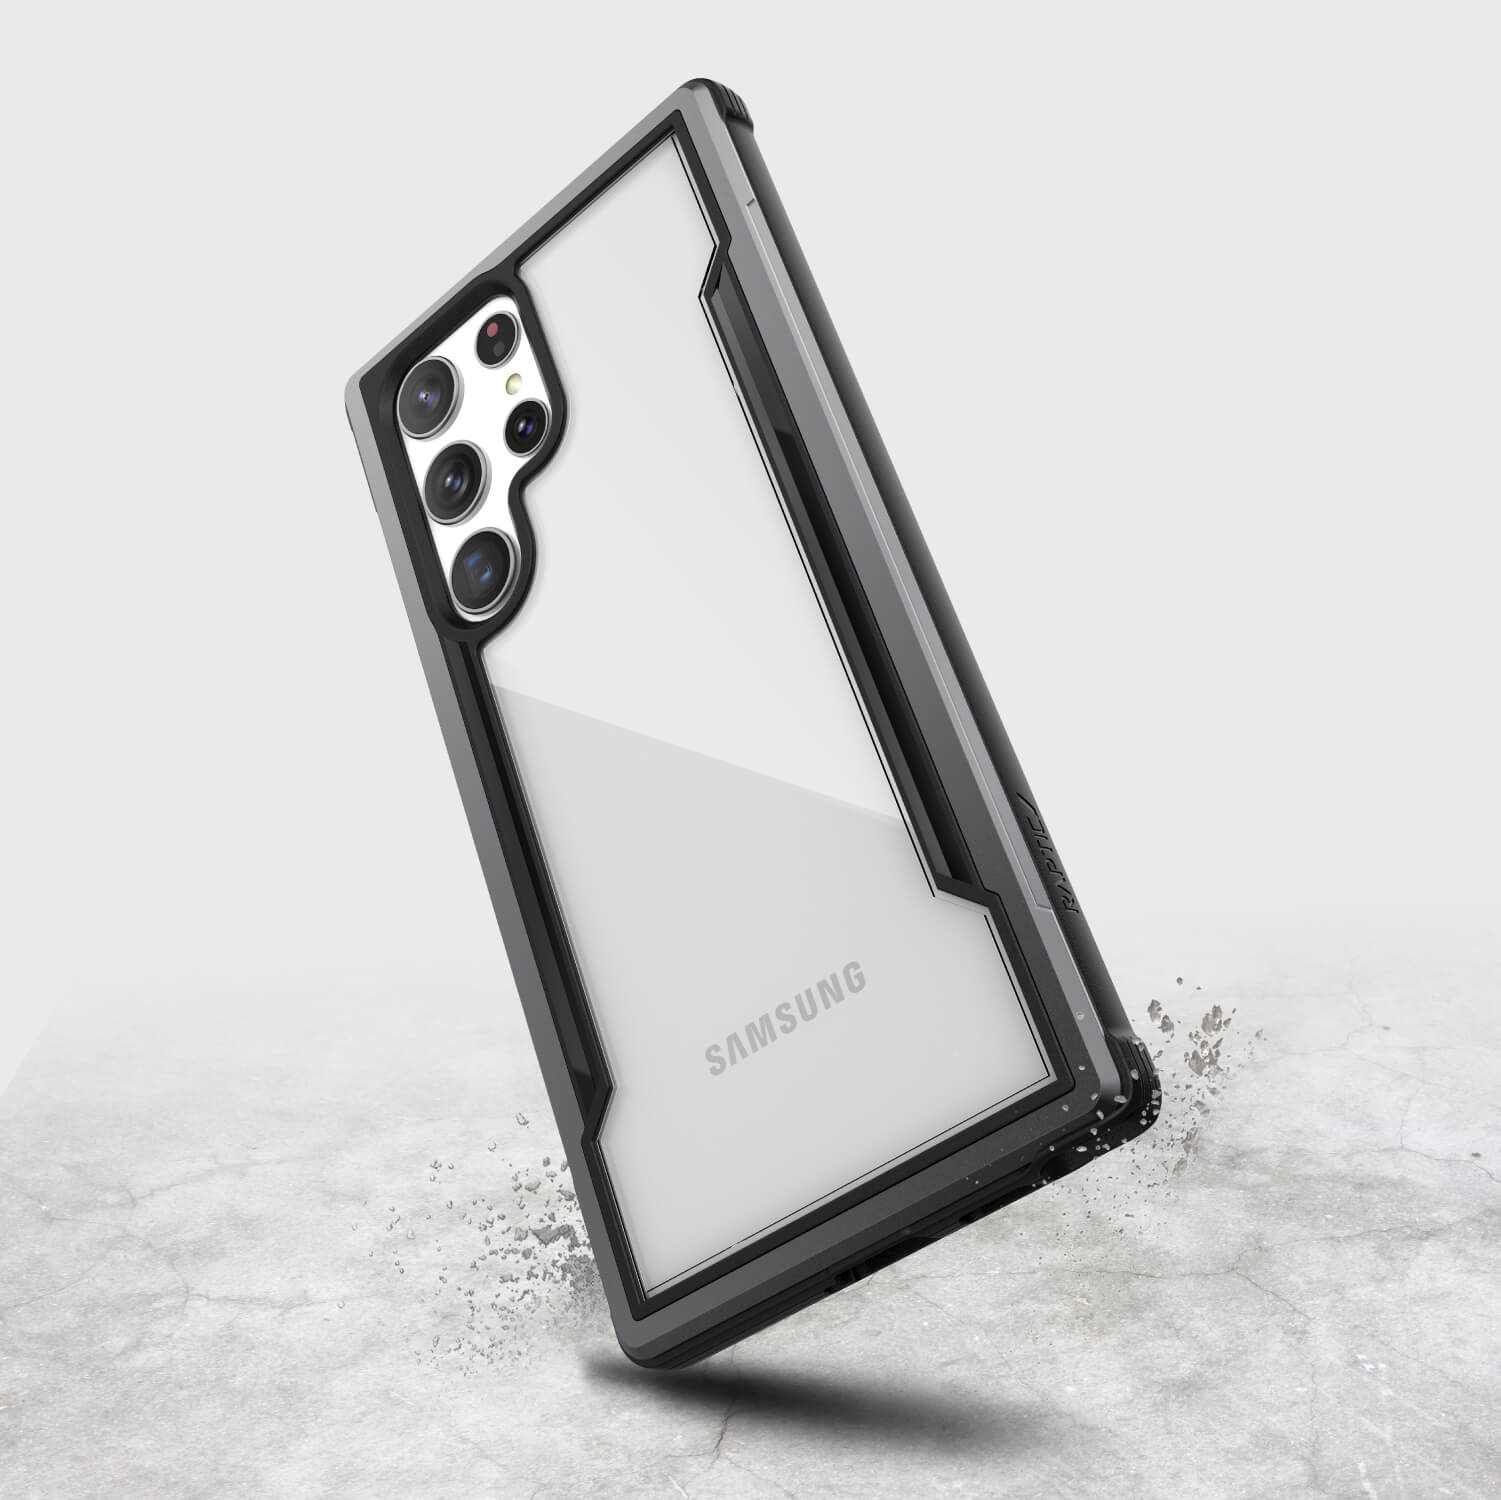 The Raptic Samsung Galaxy S22 Ultra Case - SHIELD is shown on a concrete surface.